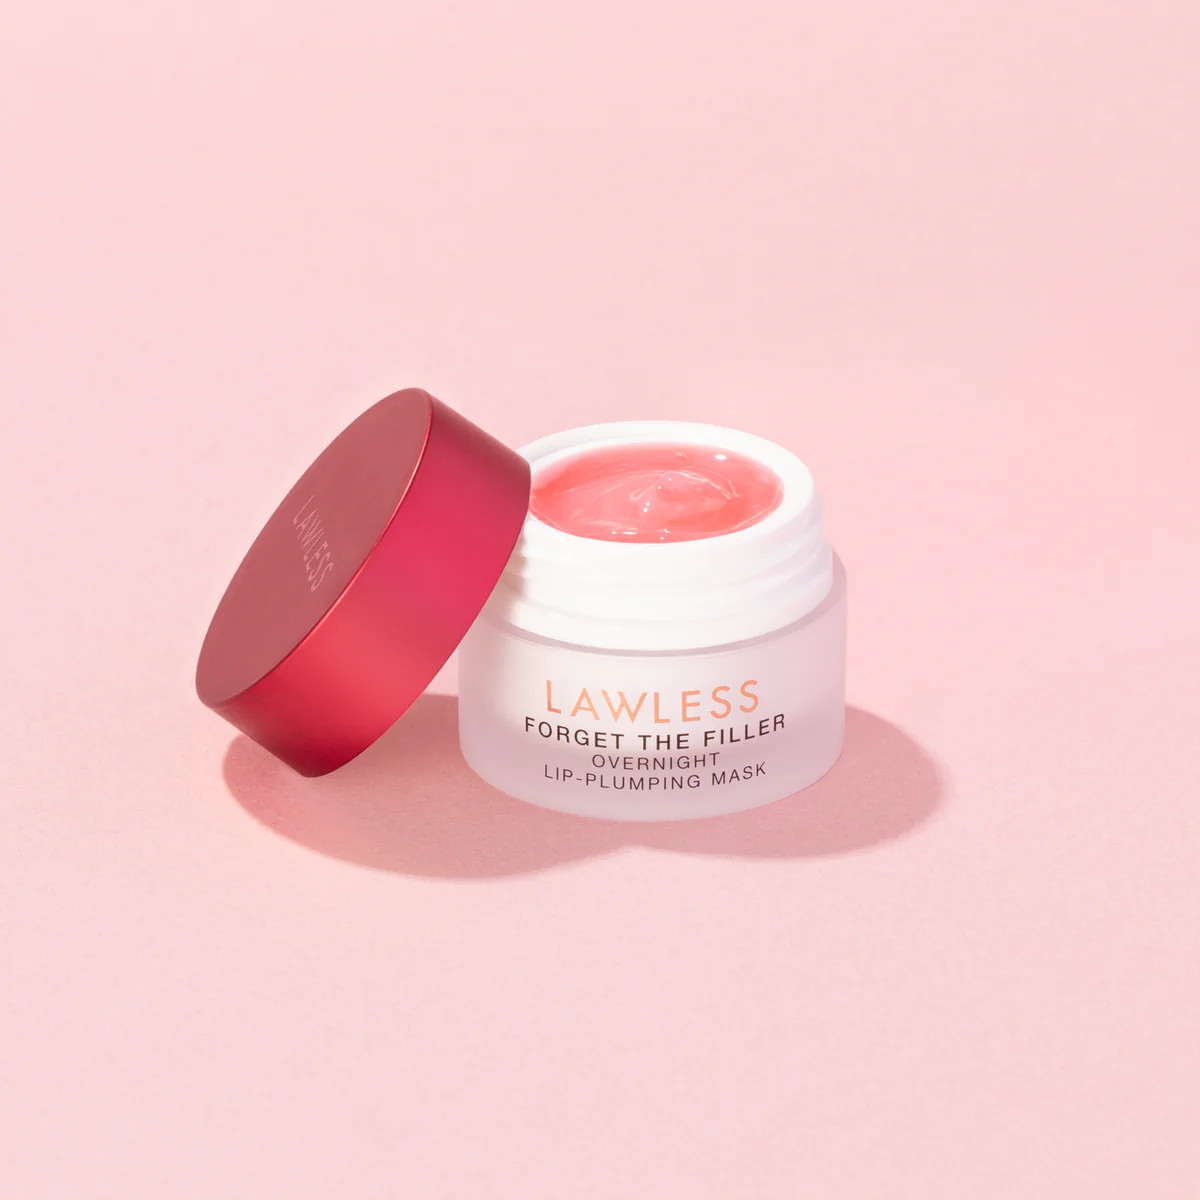 Forget the Filler Overnight Lip-Plumping Mask | Lawless Beauty | Lawless Beauty